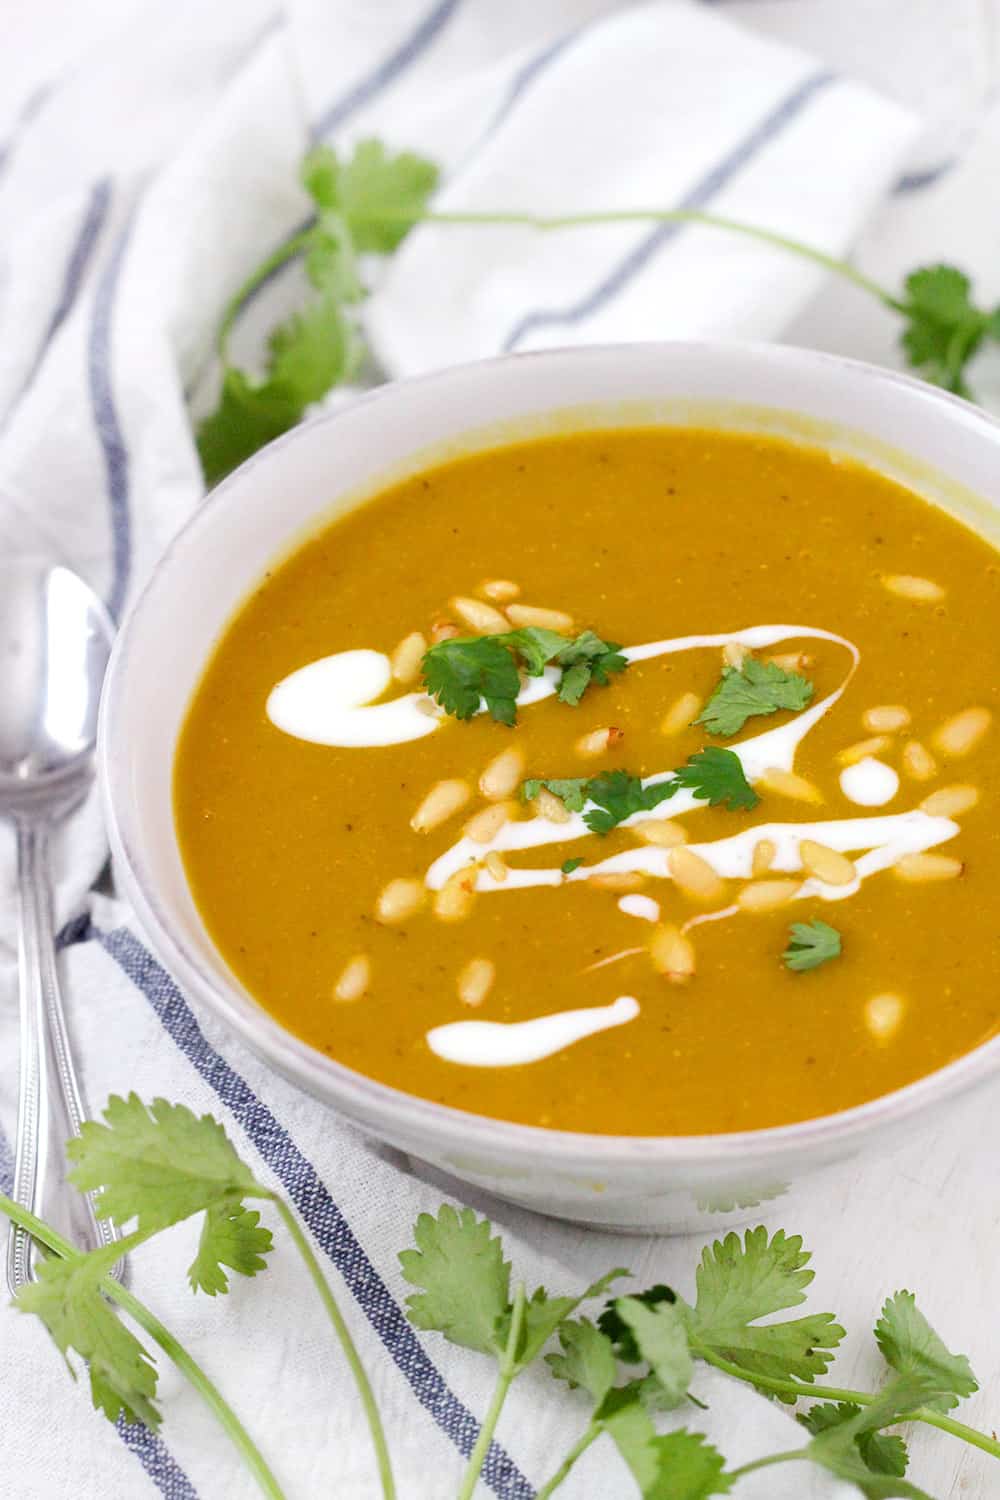 This vegan, nutrient-packed Butternut Squash and Red Lentil Soup recipe is easy, delicious, and packed with fiber, protein, and vitamins. Turmeric adds a warm, peppery flavor as well as immune-boosting properties.